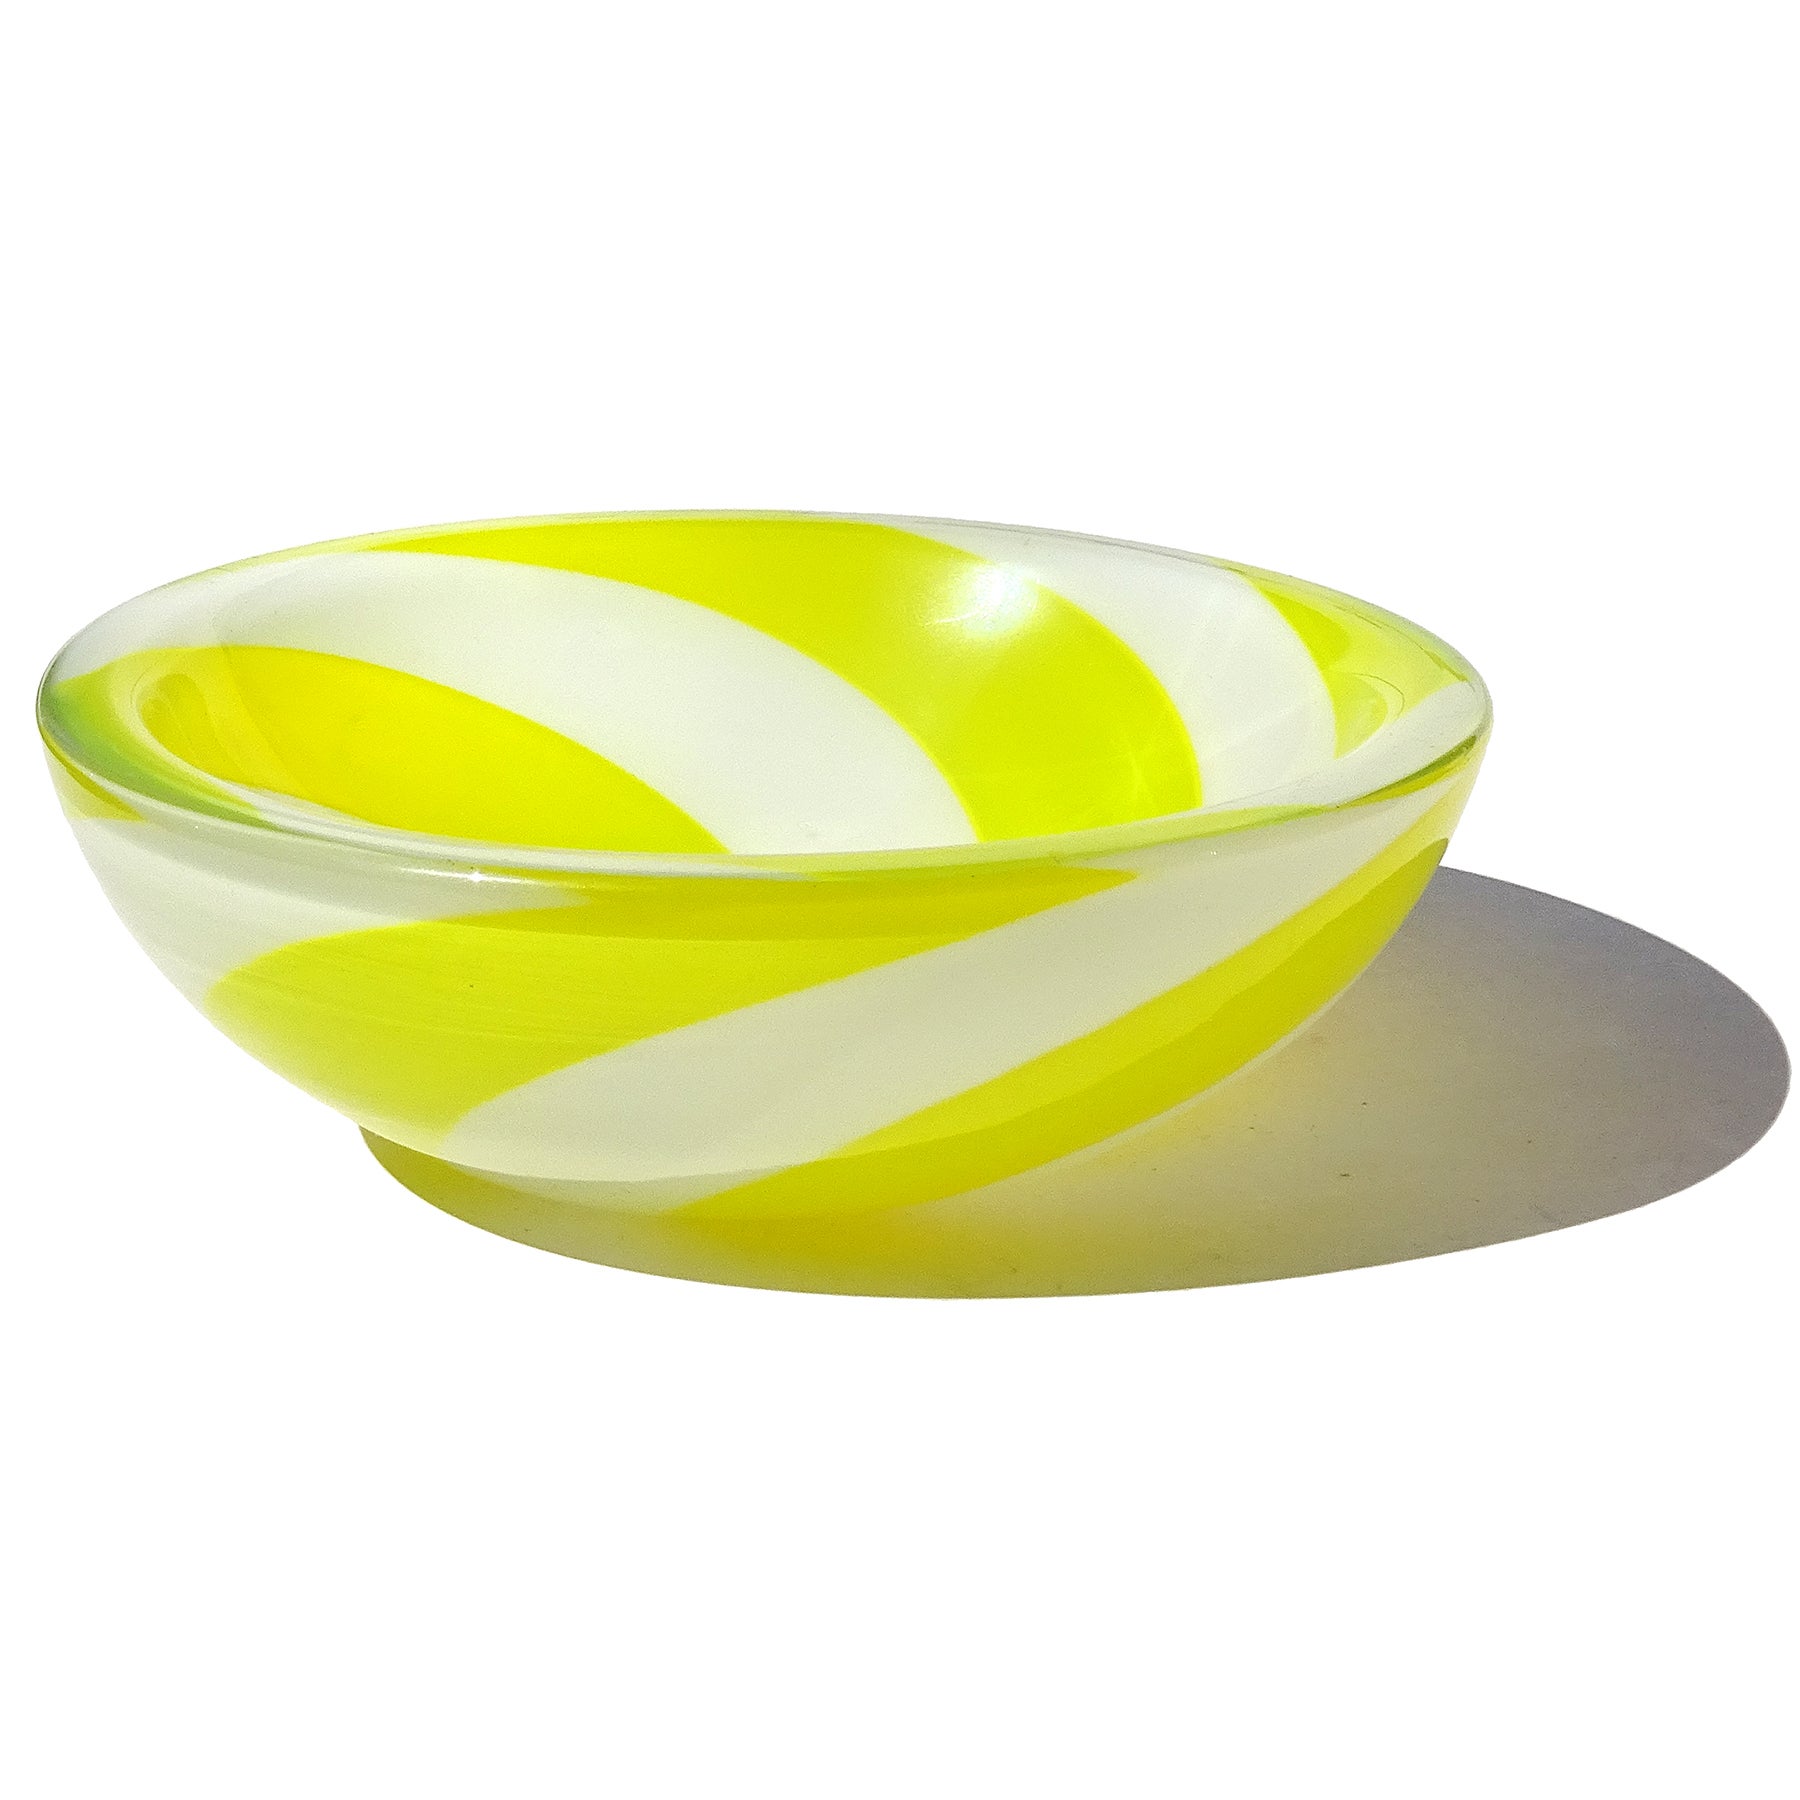 Beautiful vintage Murano hand blown yellow and white stripes optic swirl Italian art glass bowl or vide-poche. The bowl has been documented to designer Fulvio Bianconi, for the Venini company. Described as an 